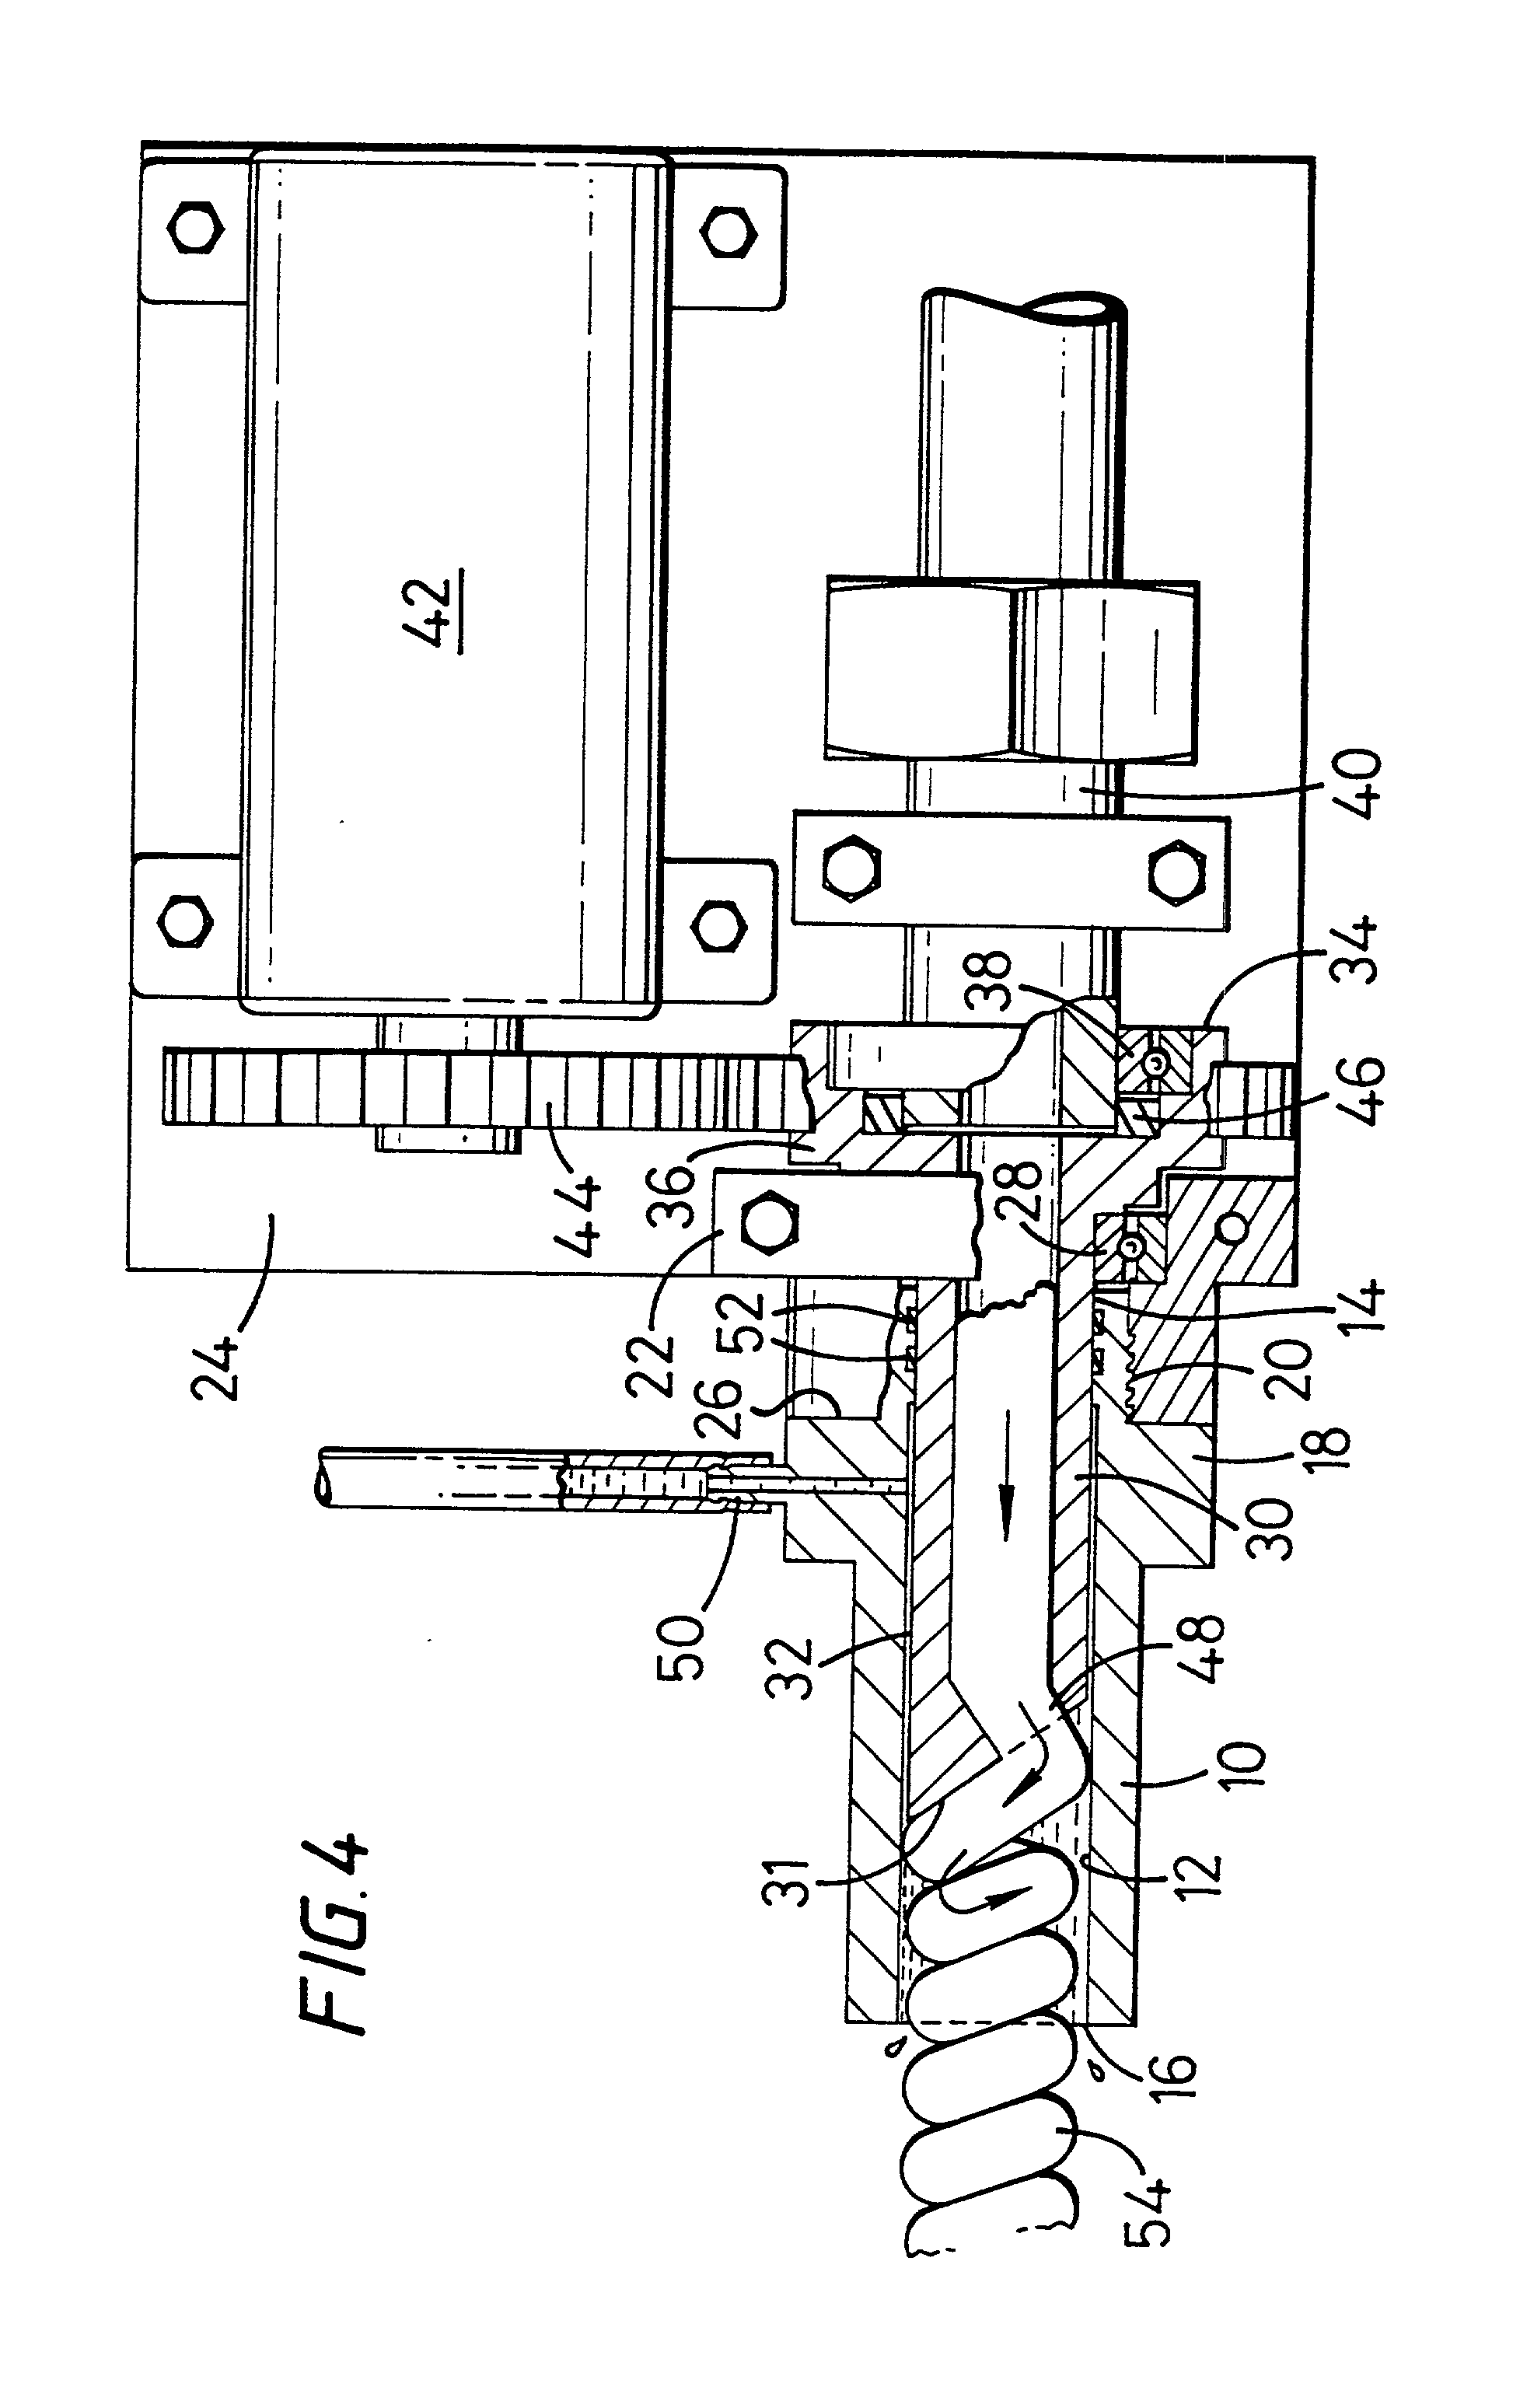 Method and apparatus for making an helical food product